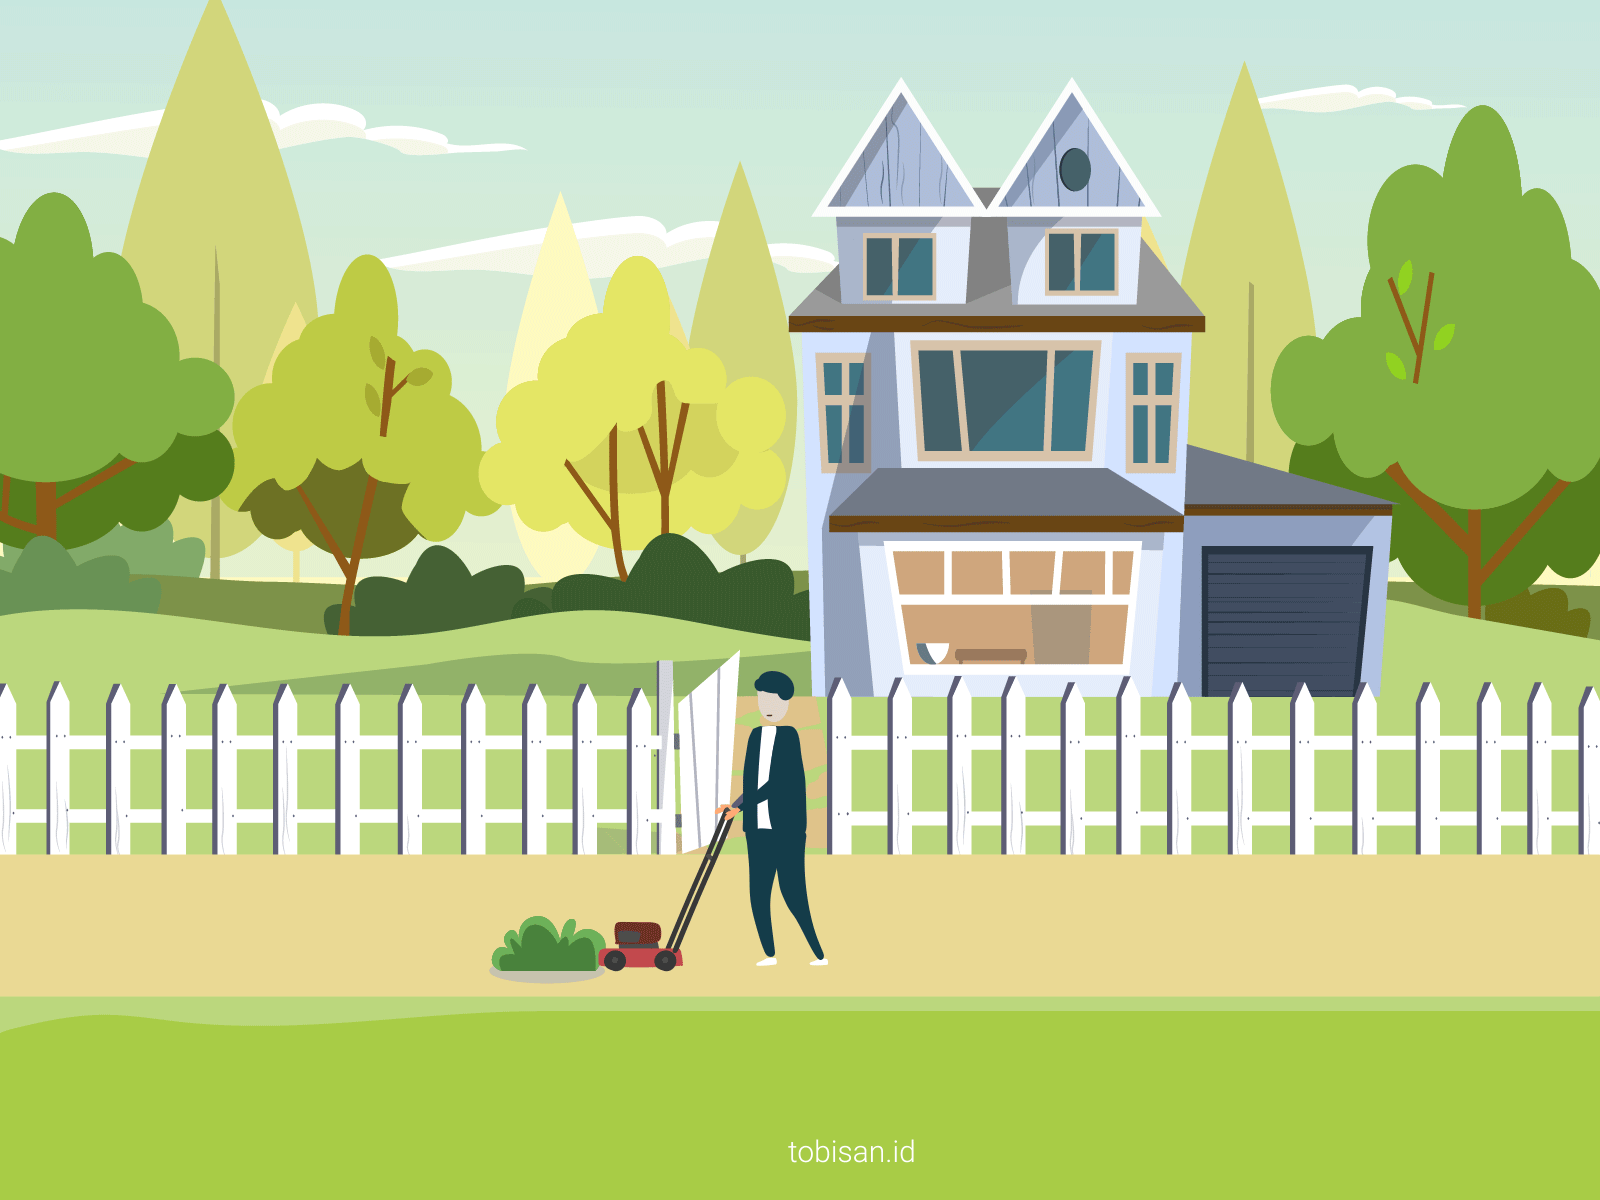 Trying Hard to cut grass by Createra Labs on Dribbble